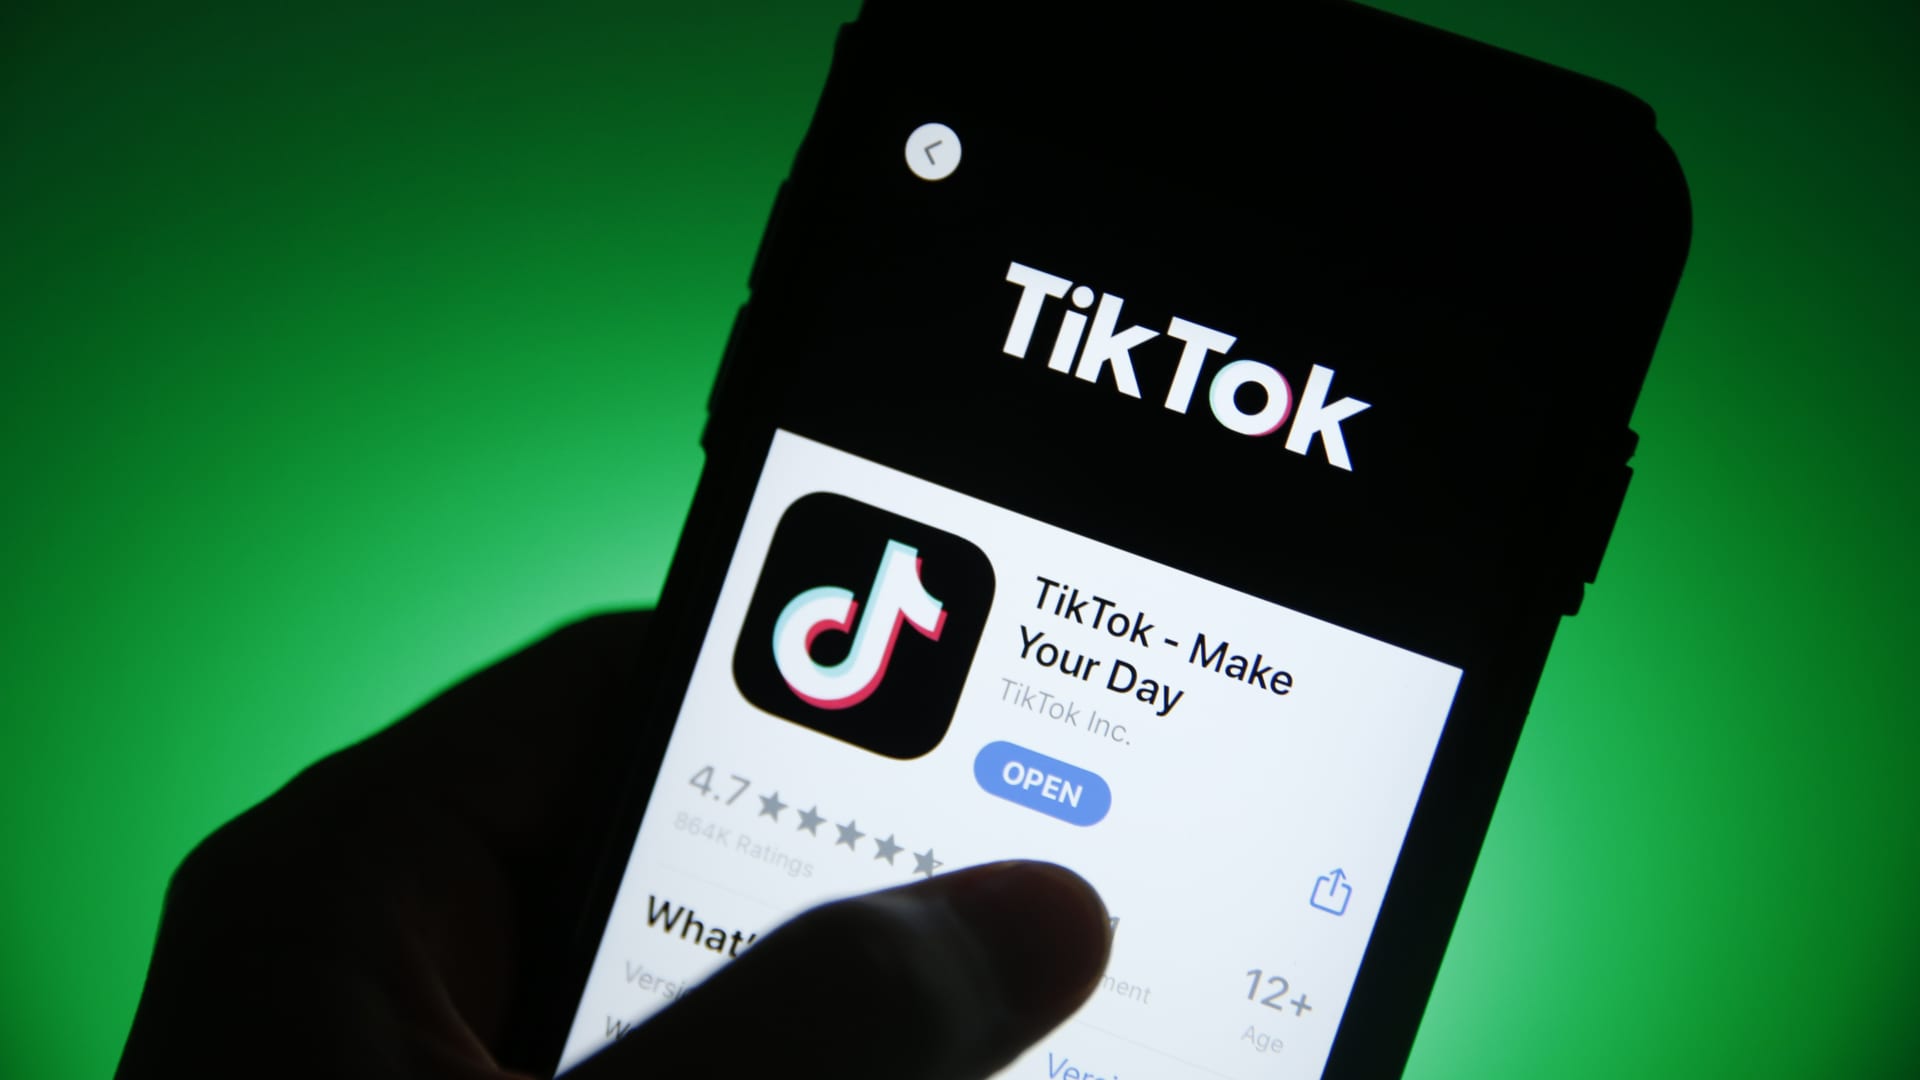 The TikTok app is displayed in the app store in this arranged photograph in London, on Monday, Aug. 3, 2020.